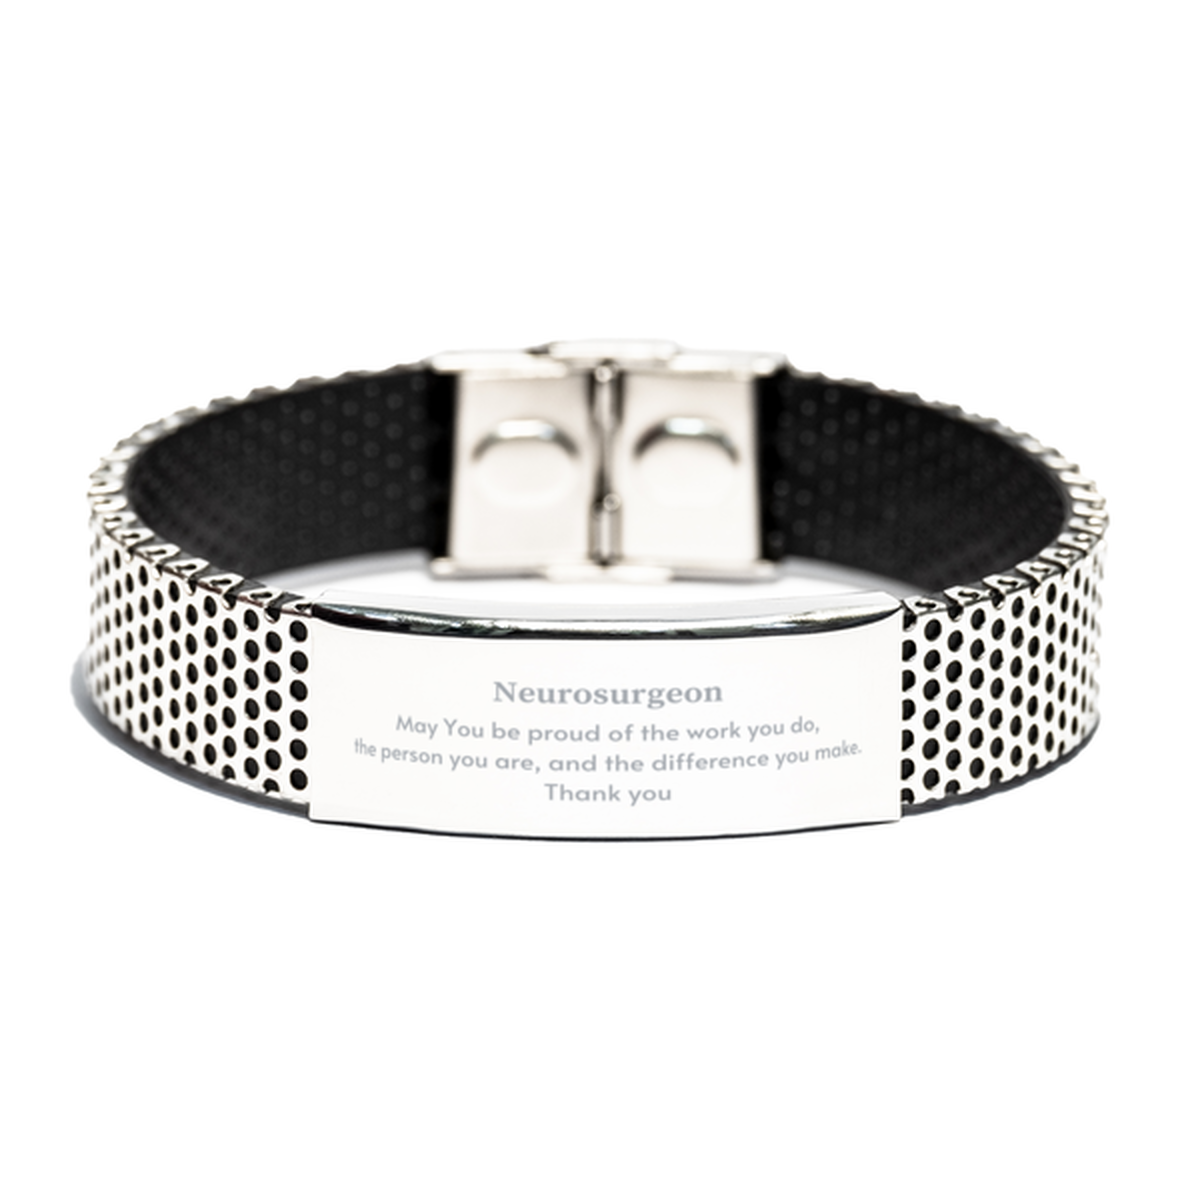 Heartwarming Stainless Steel Bracelet Retirement Coworkers Gifts for Neurosurgeon, Neurosurgeon May You be proud of the work you do, the person you are Gifts for Boss Men Women Friends